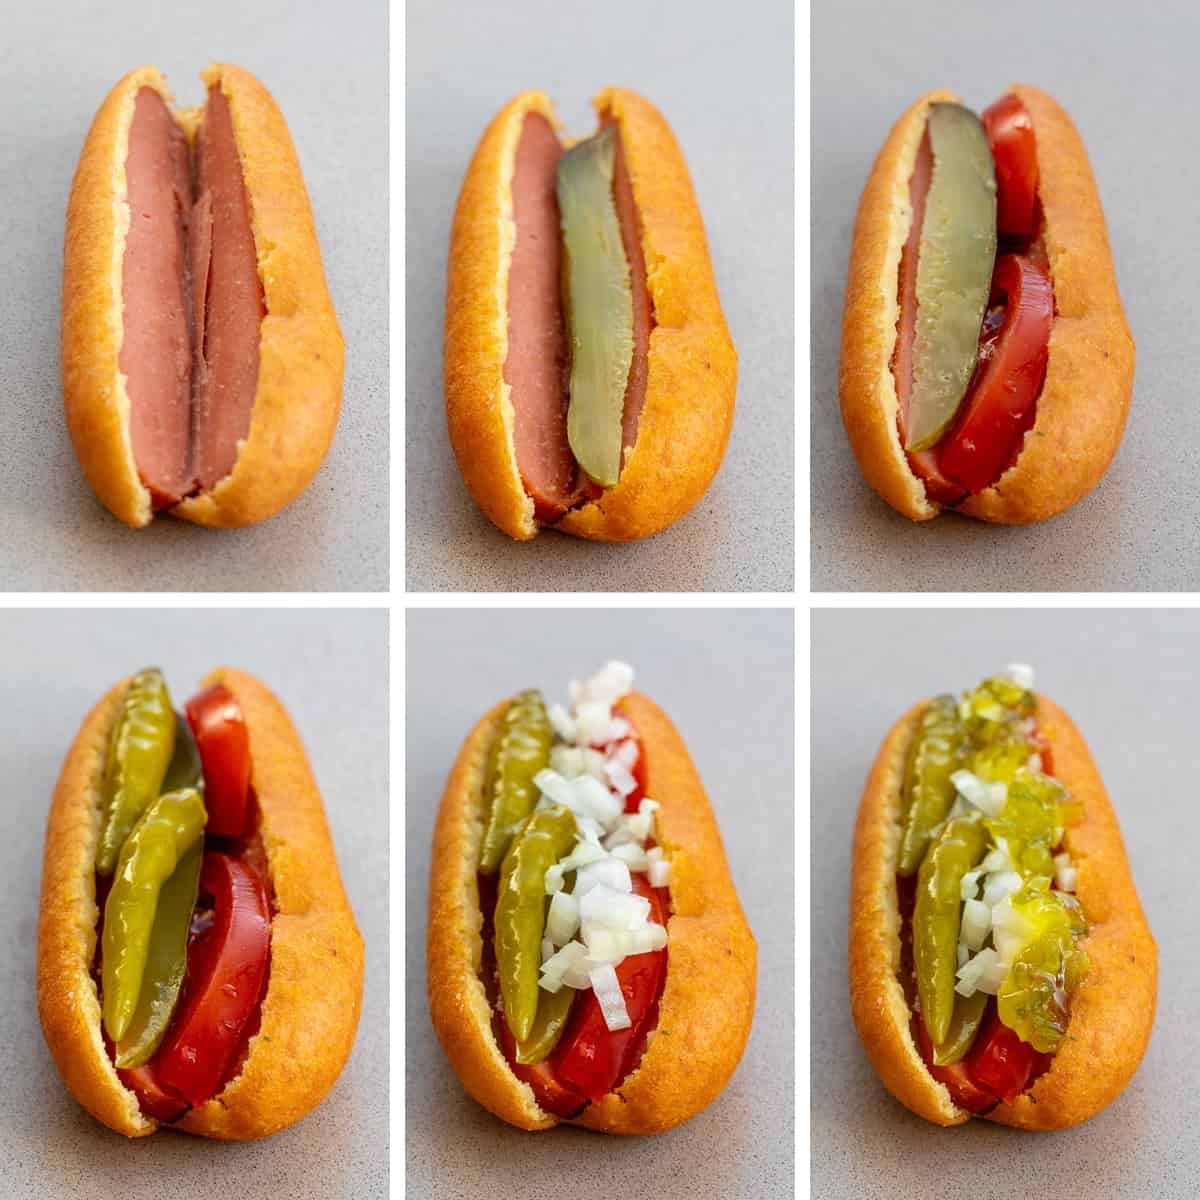 Steps for Adding Ingredients to a Corndog to make Chicago Style Corn Dogs.